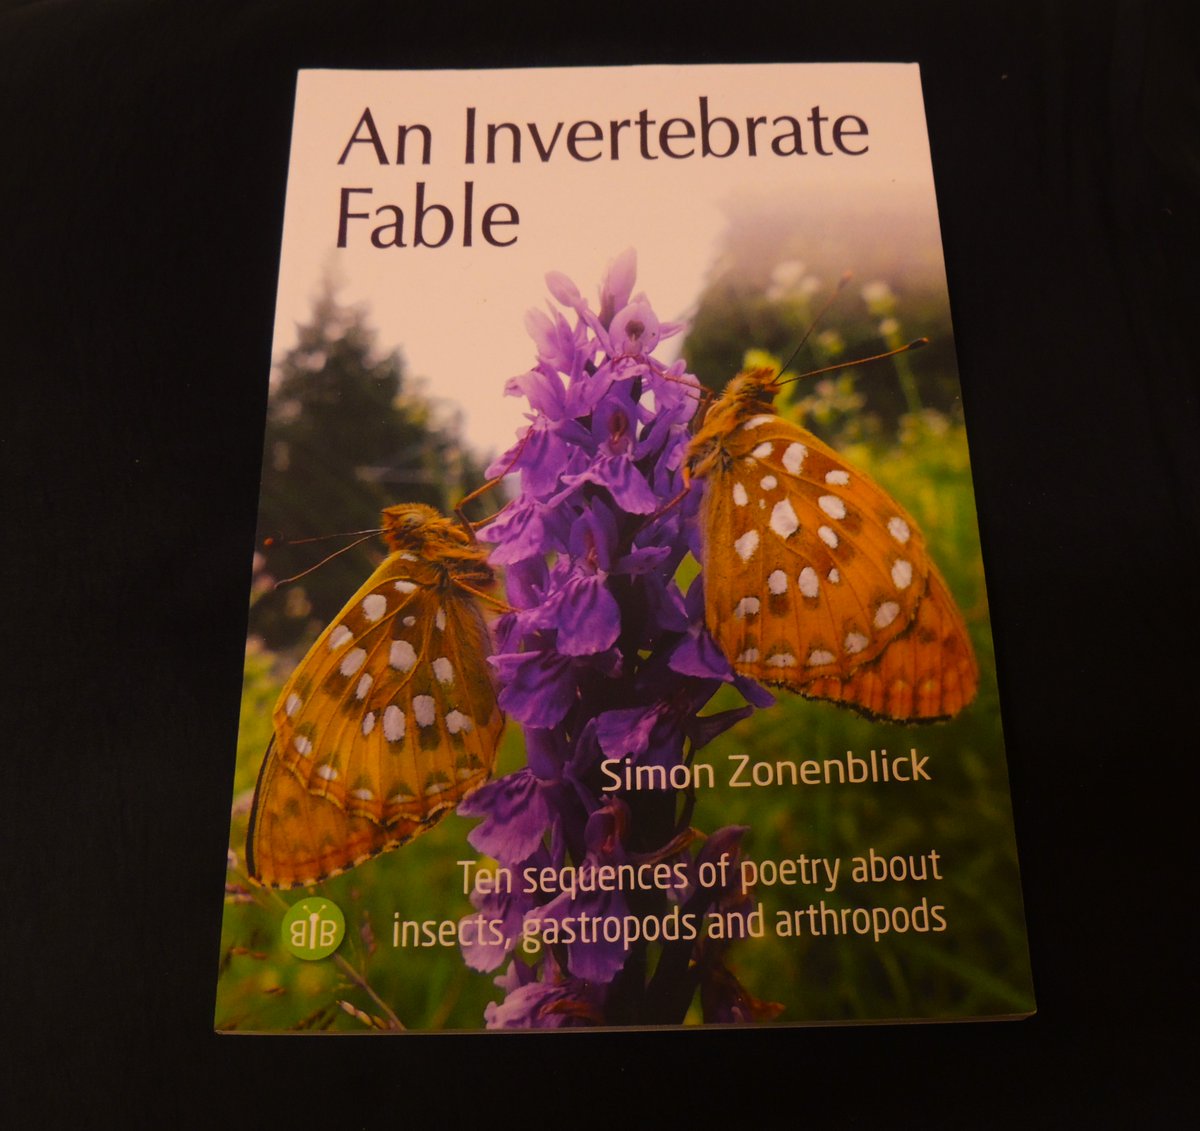 An Invertebrate Fable is my first full length #poetry collection, published by @BramblebyBooks in 2022. Buy it here bramblebybooks.co.uk/book/an-invert…